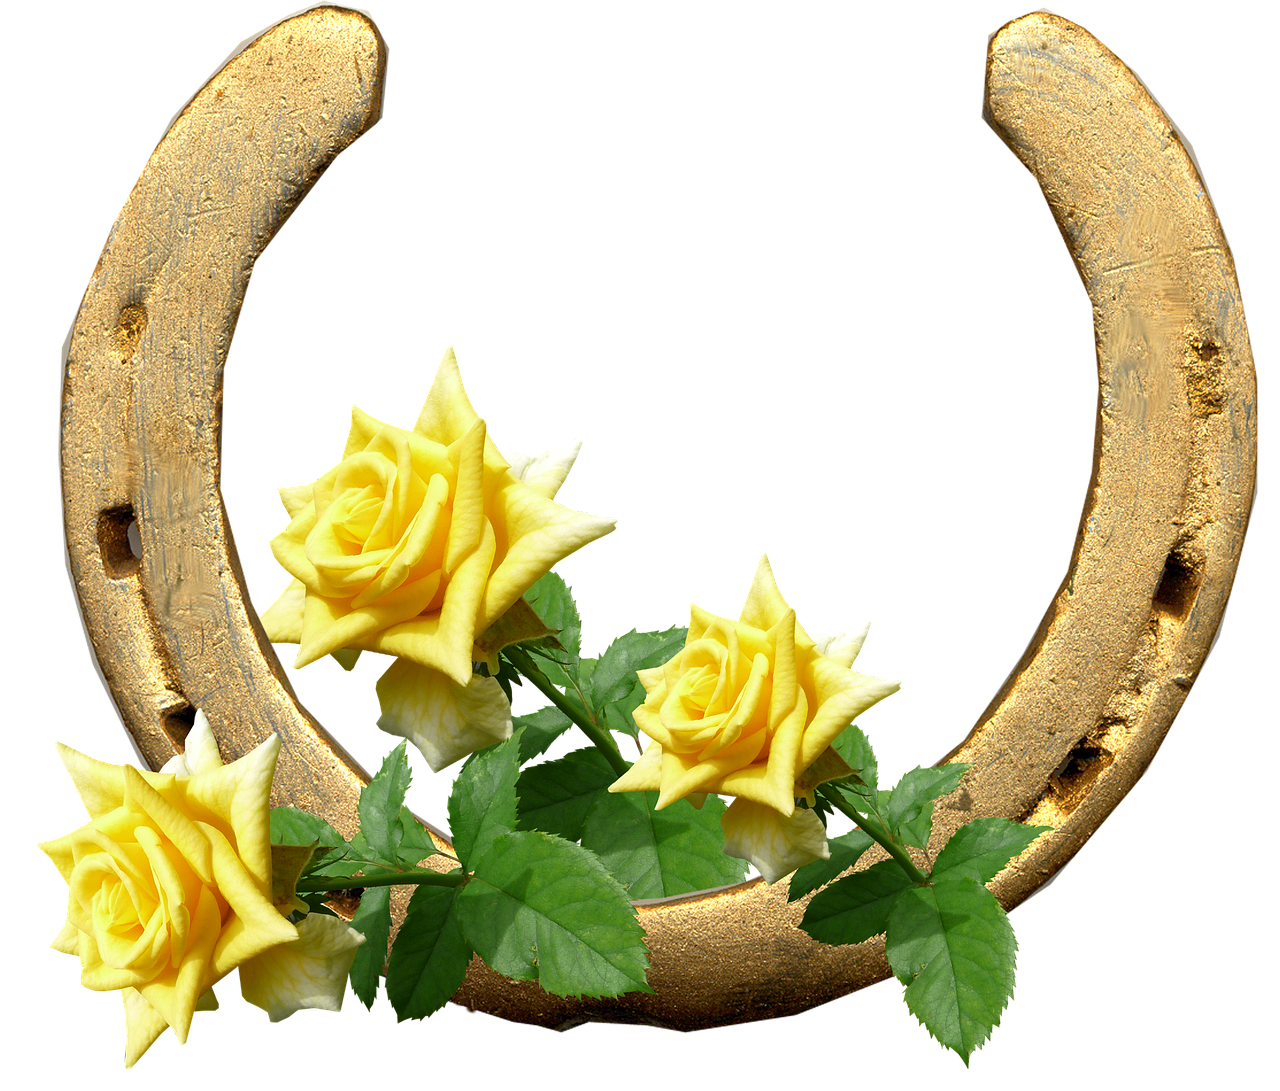 horse shoe yellow roses lucky free photo